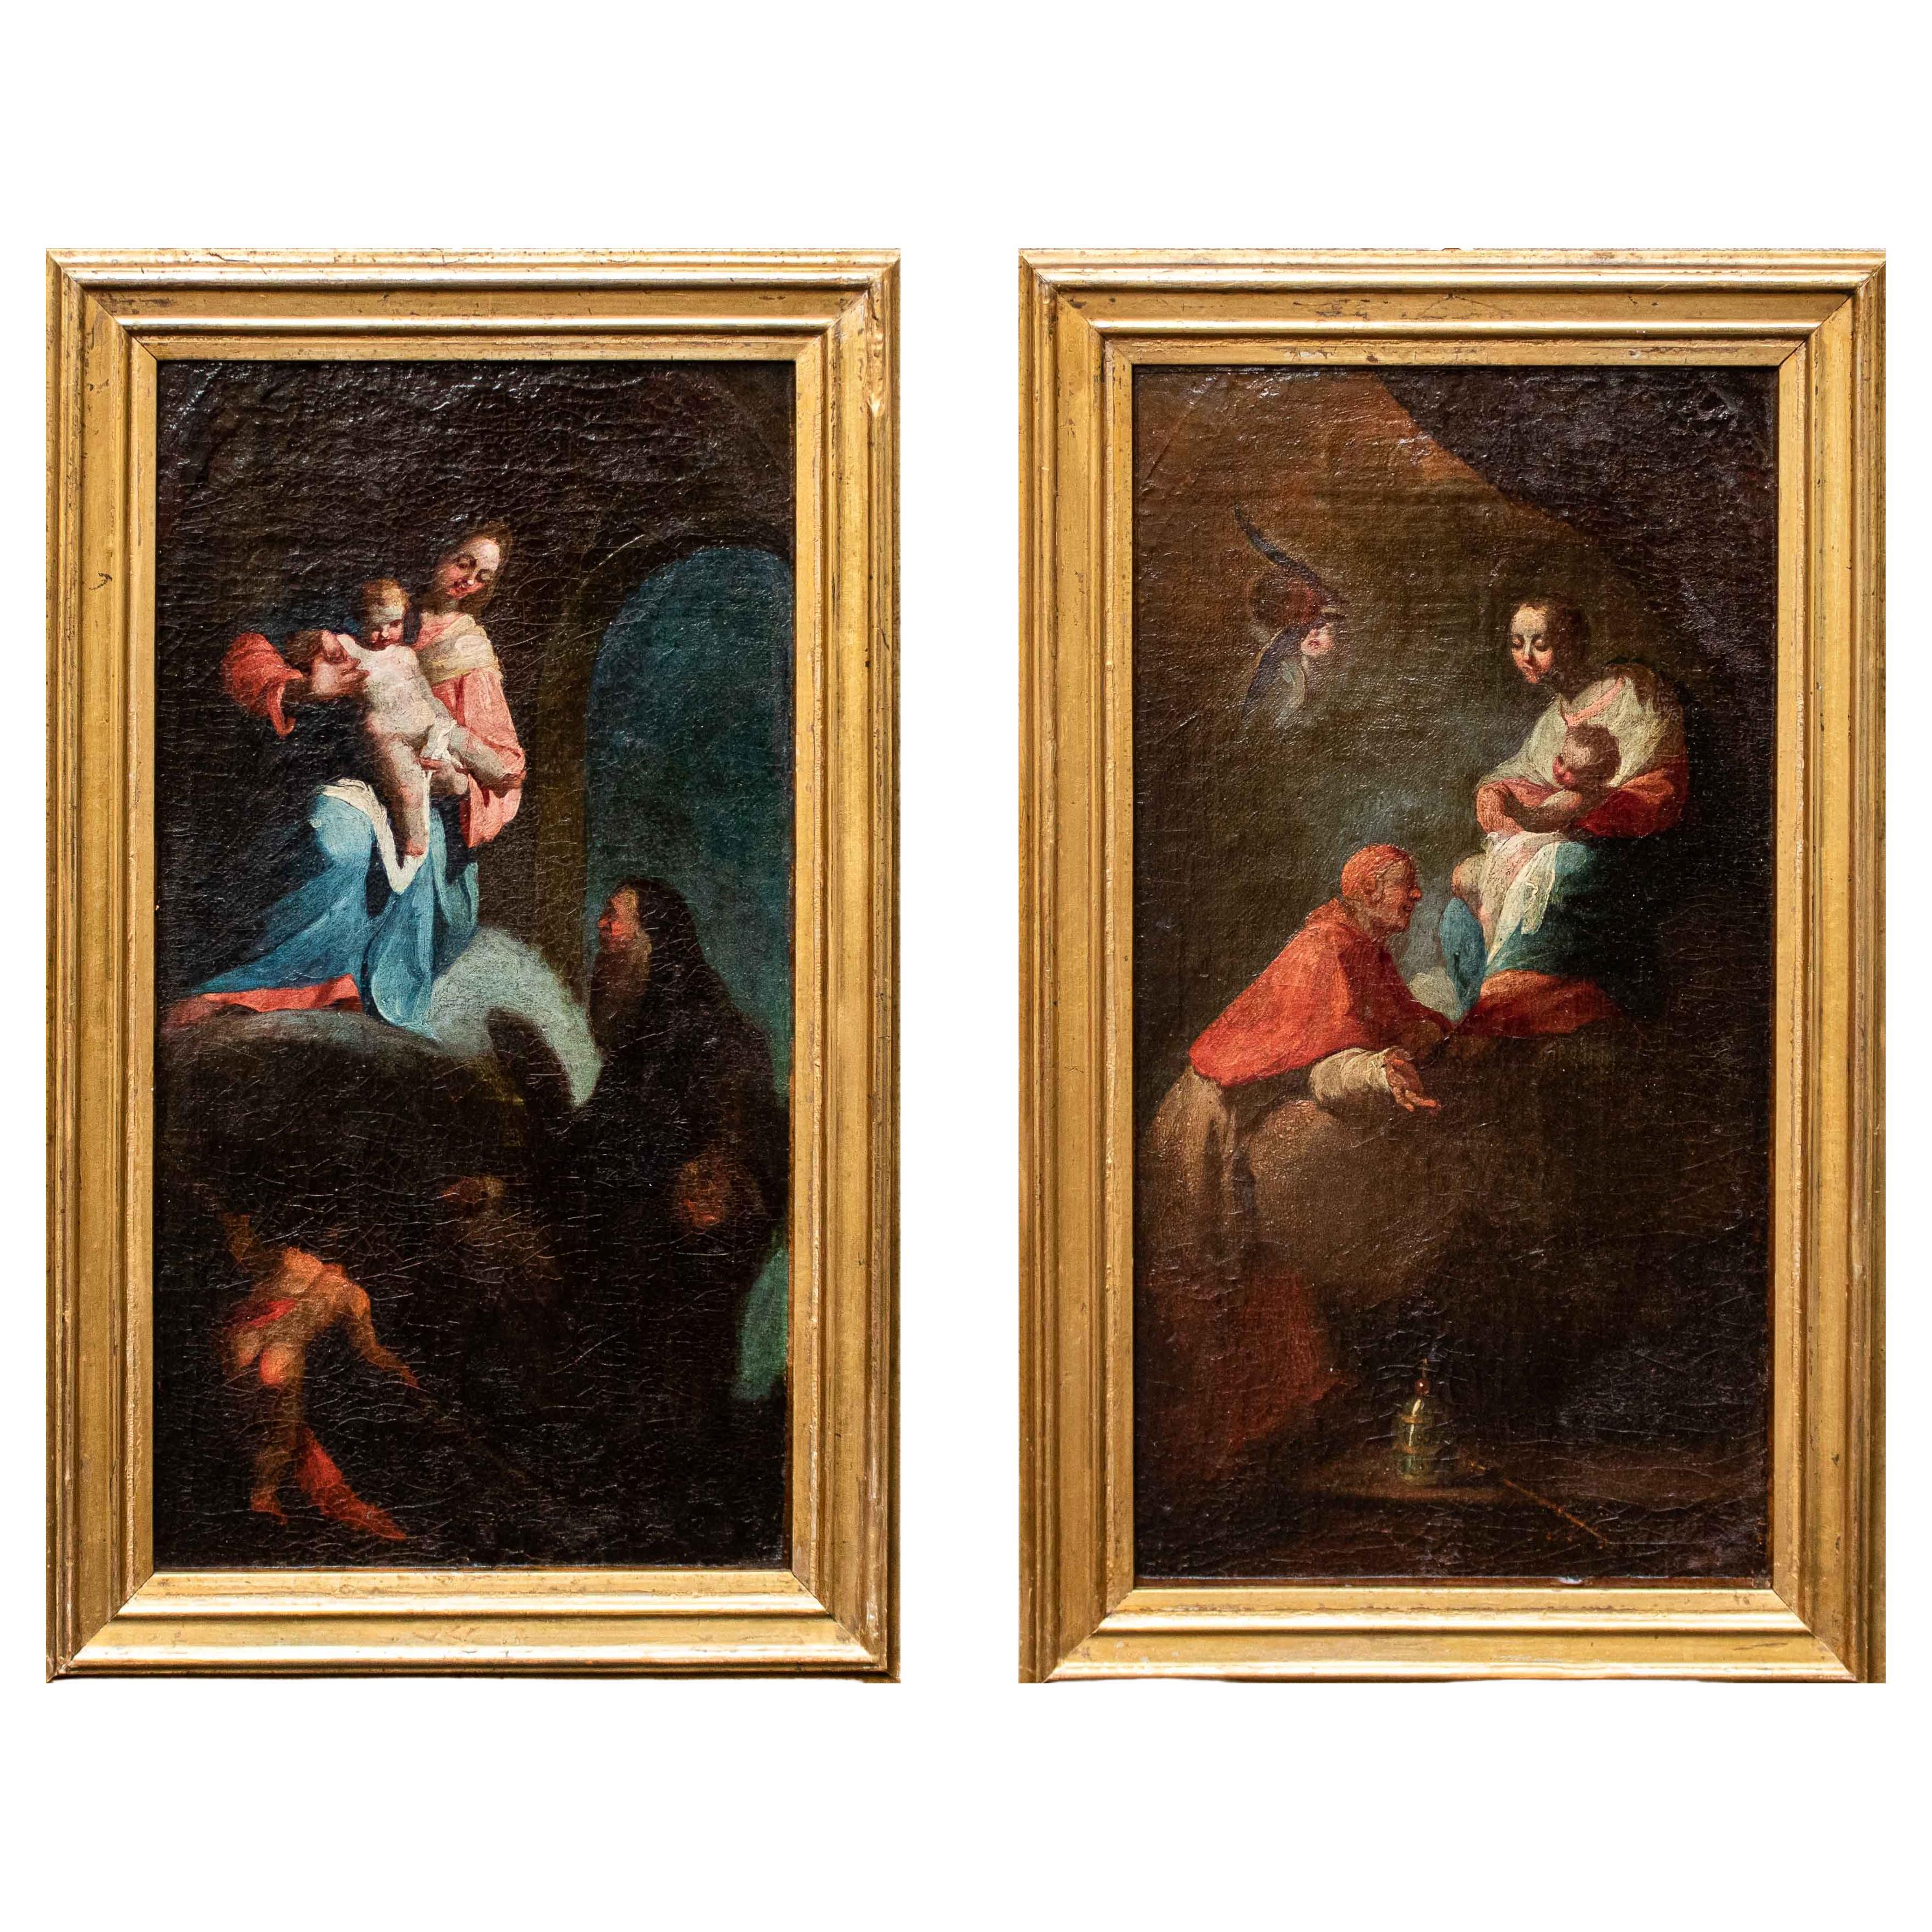 18th Century Madonna with Child Adored by Two Saints Paintings Oil on Canvas